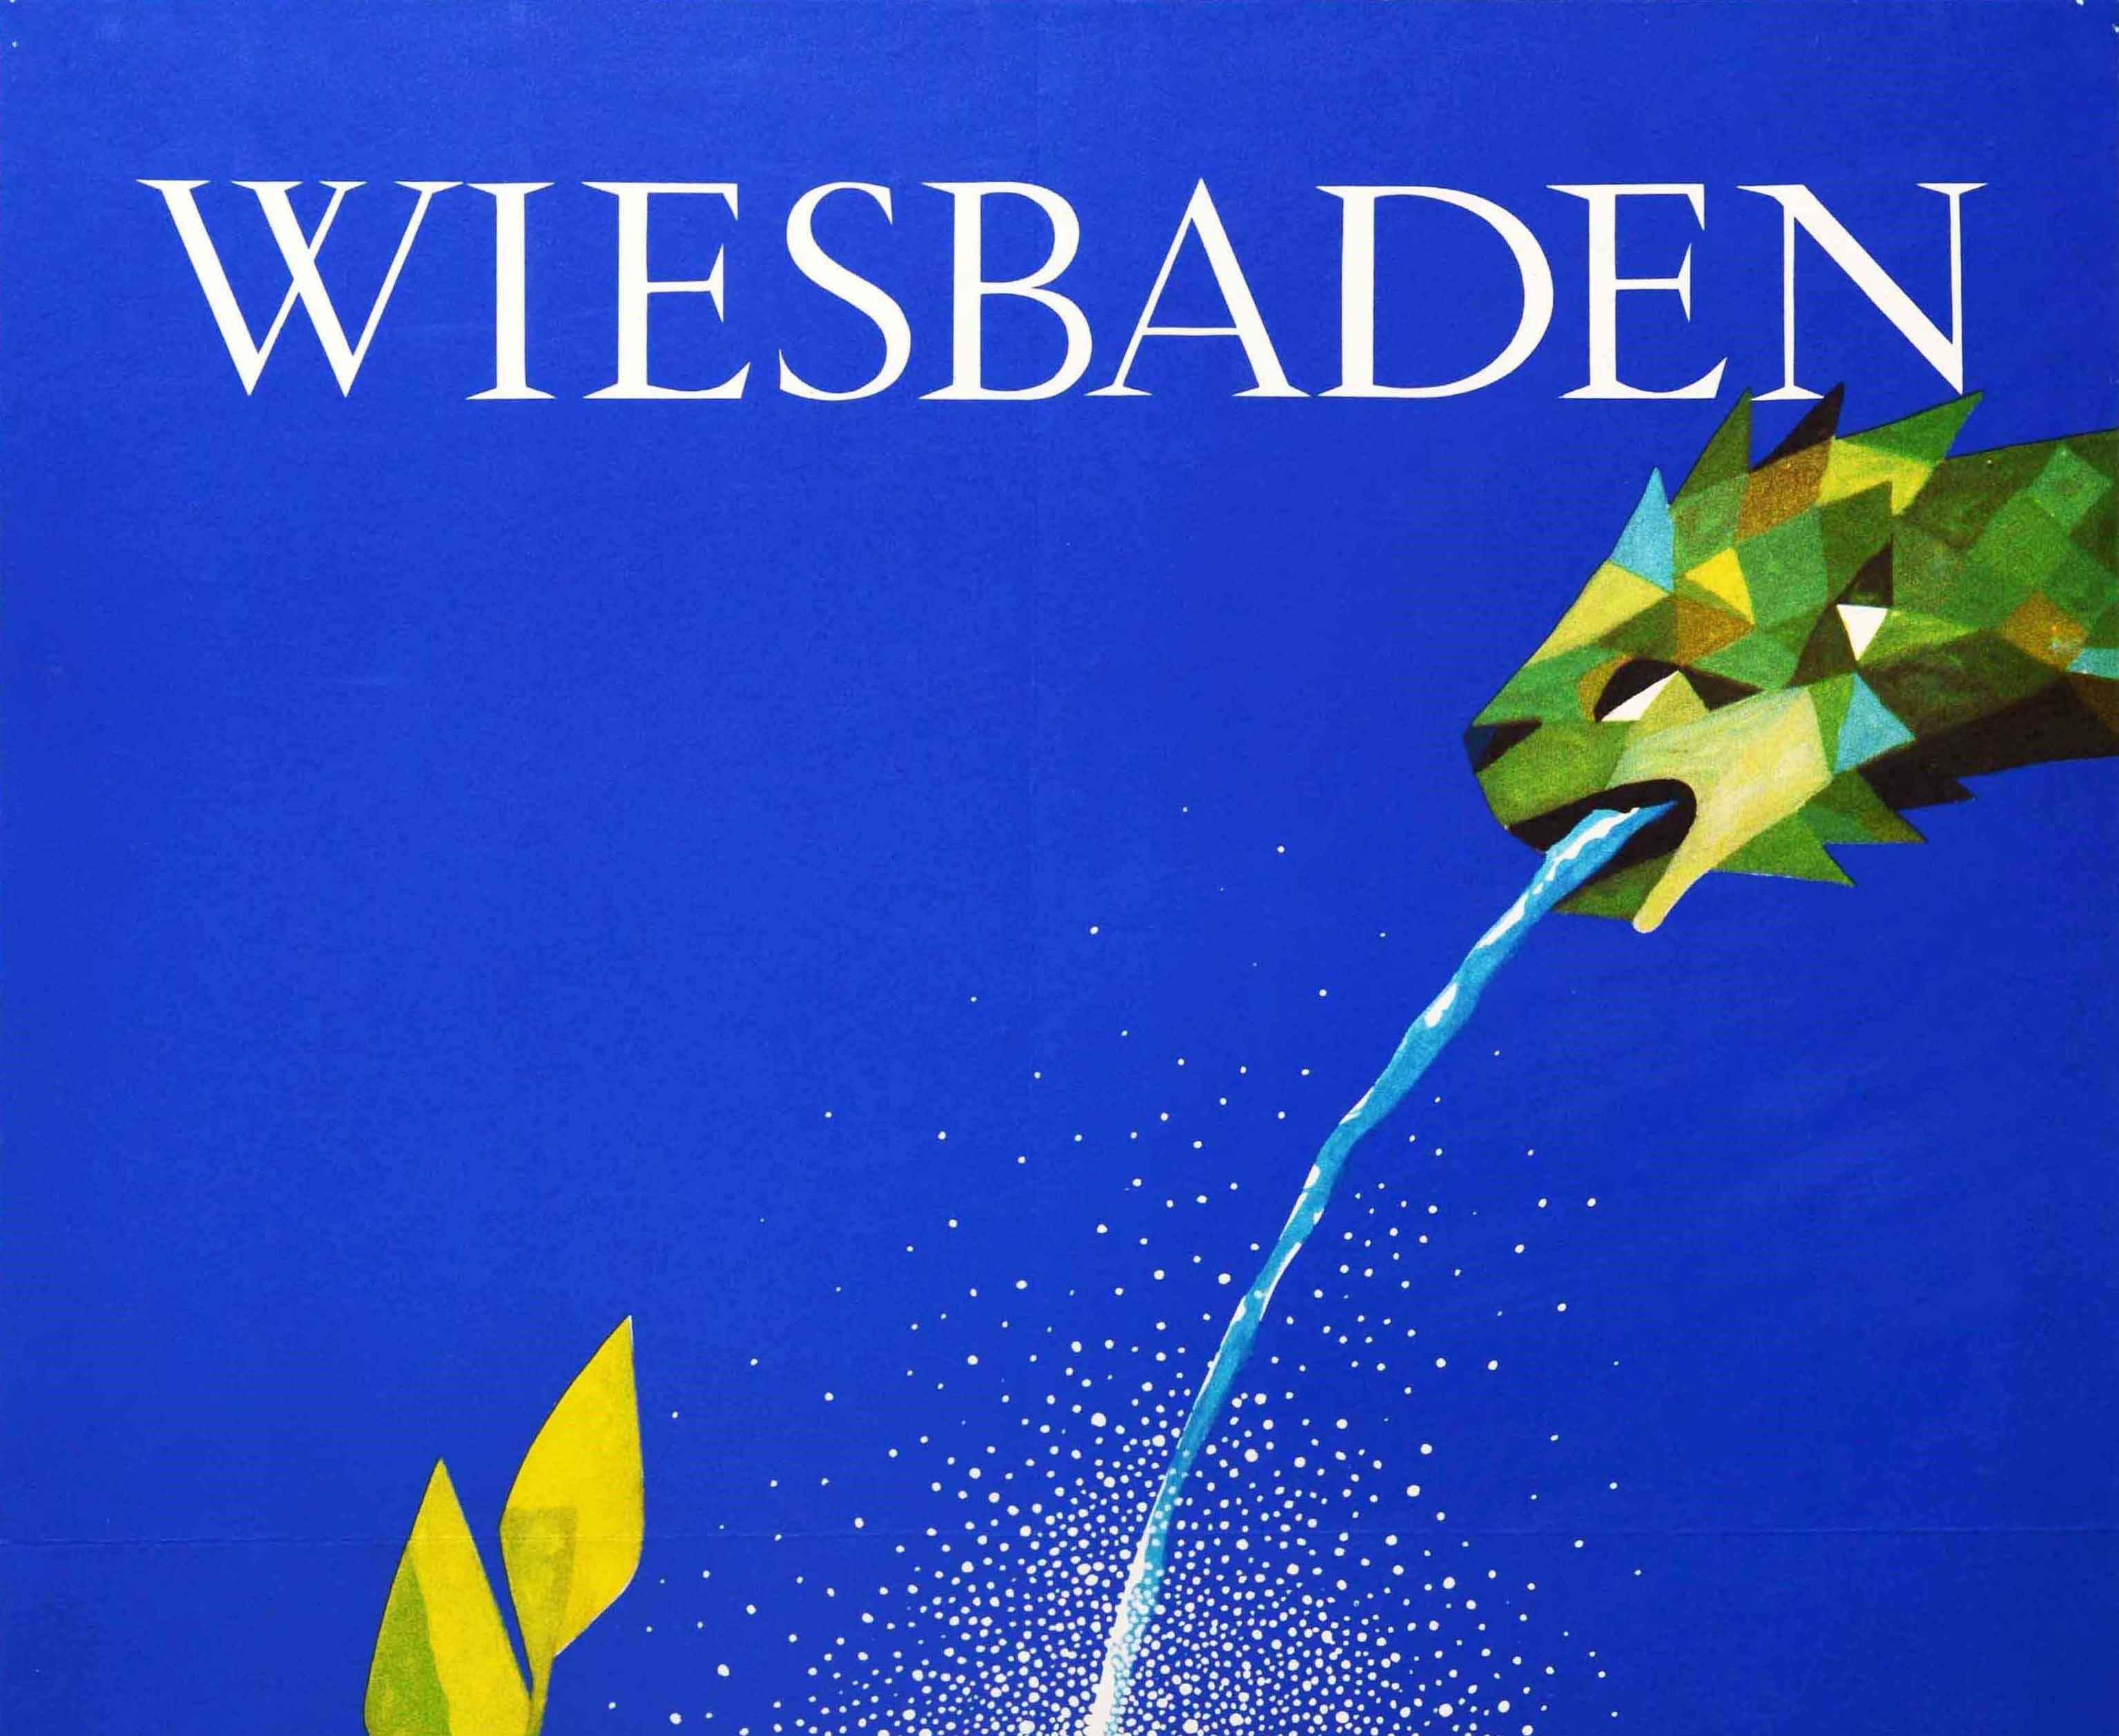 Original vintage travel poster for Wiesbaden featuring a great illustration of an animal head fountain pouring water into an elegant blue vessel with a wave pattern on it, a green branch below against a blue background. Text in white above and below